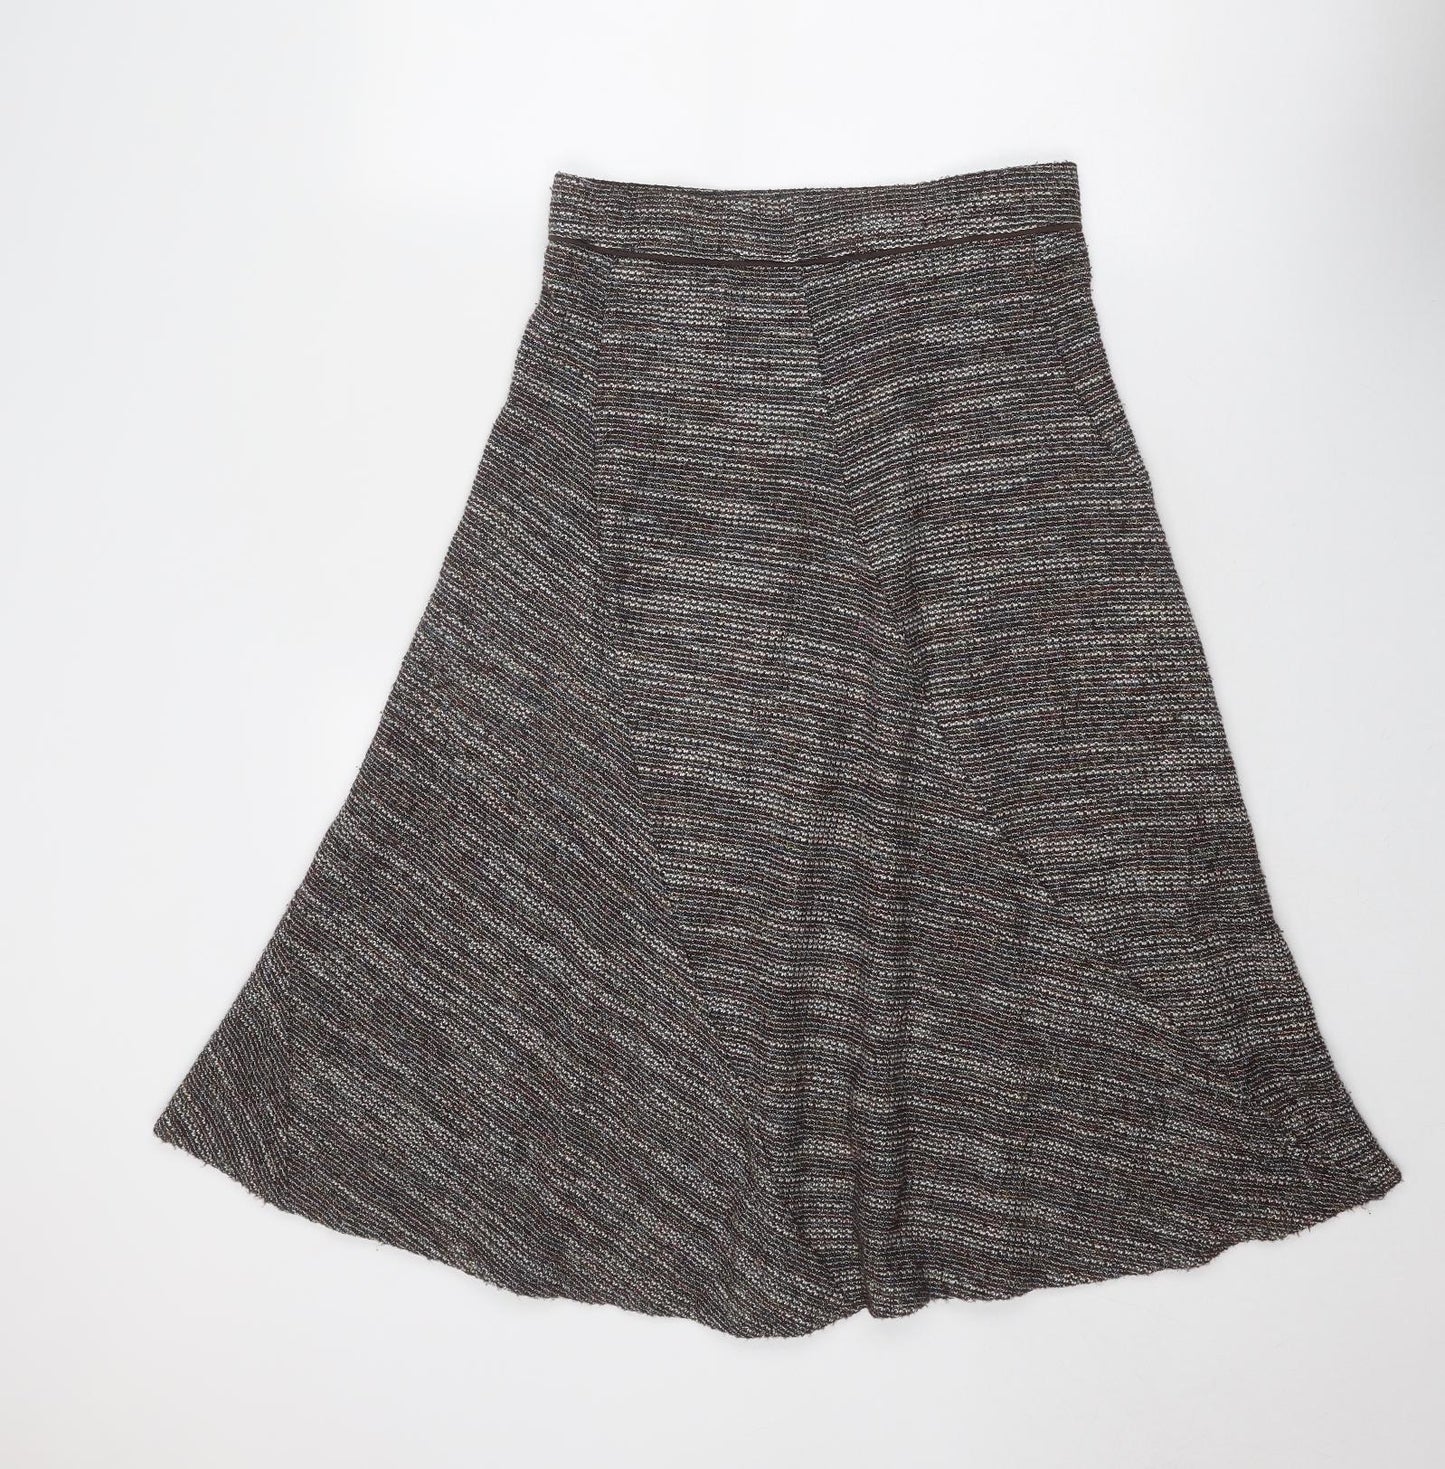 Marks and Spencer Womens Brown Polyester Swing Skirt Size 10